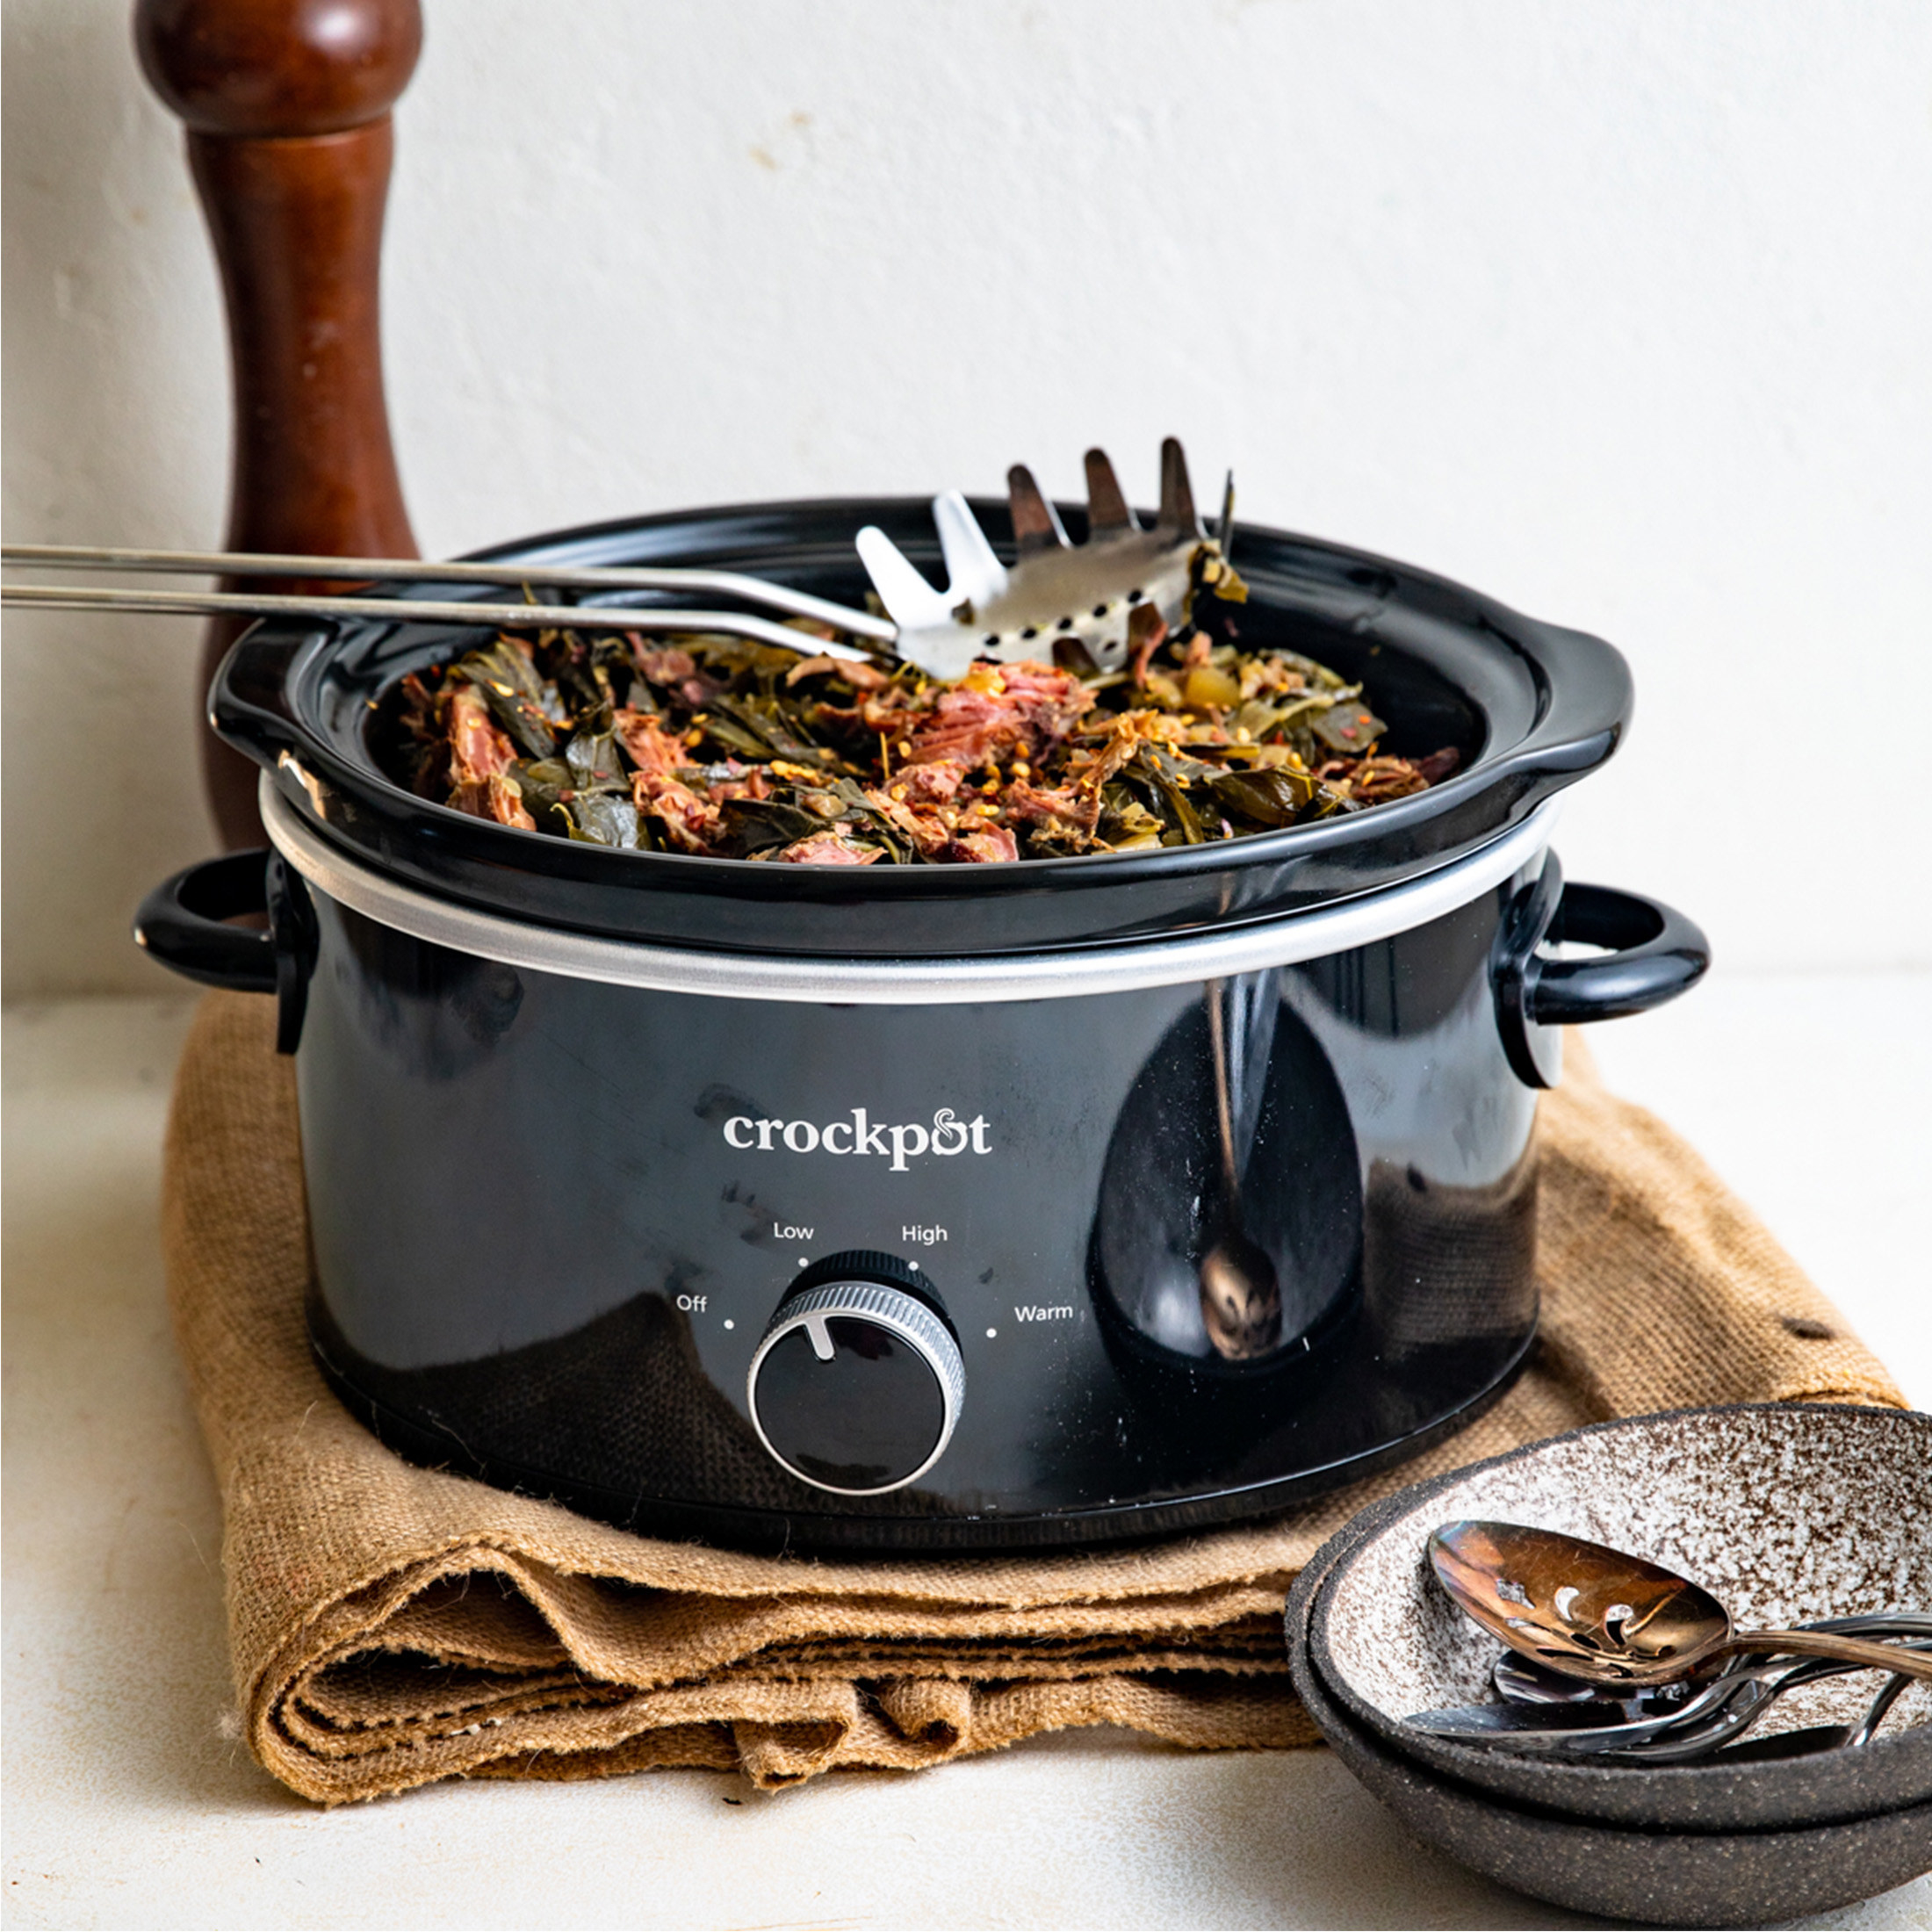 a black Crock-Pot slow cooker containing cooked vegetables